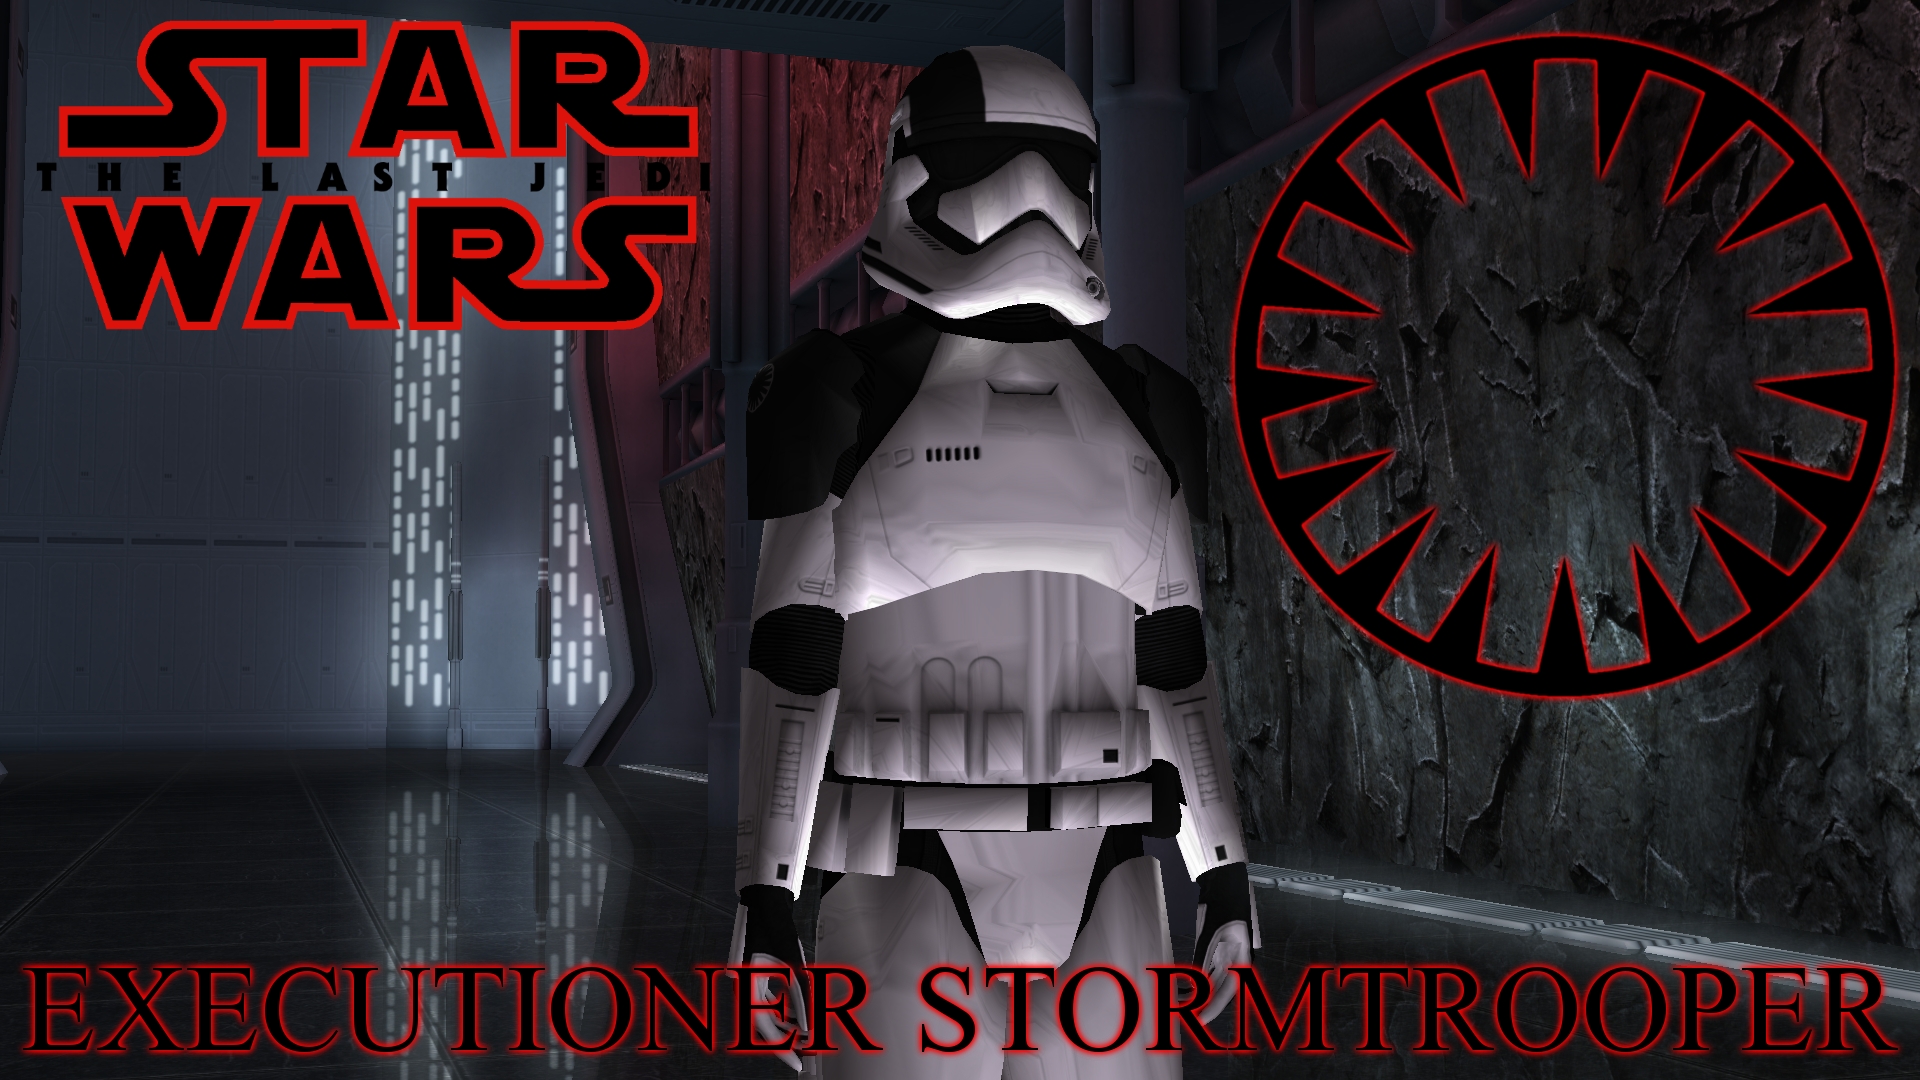 More information about "Executioner Trooper"